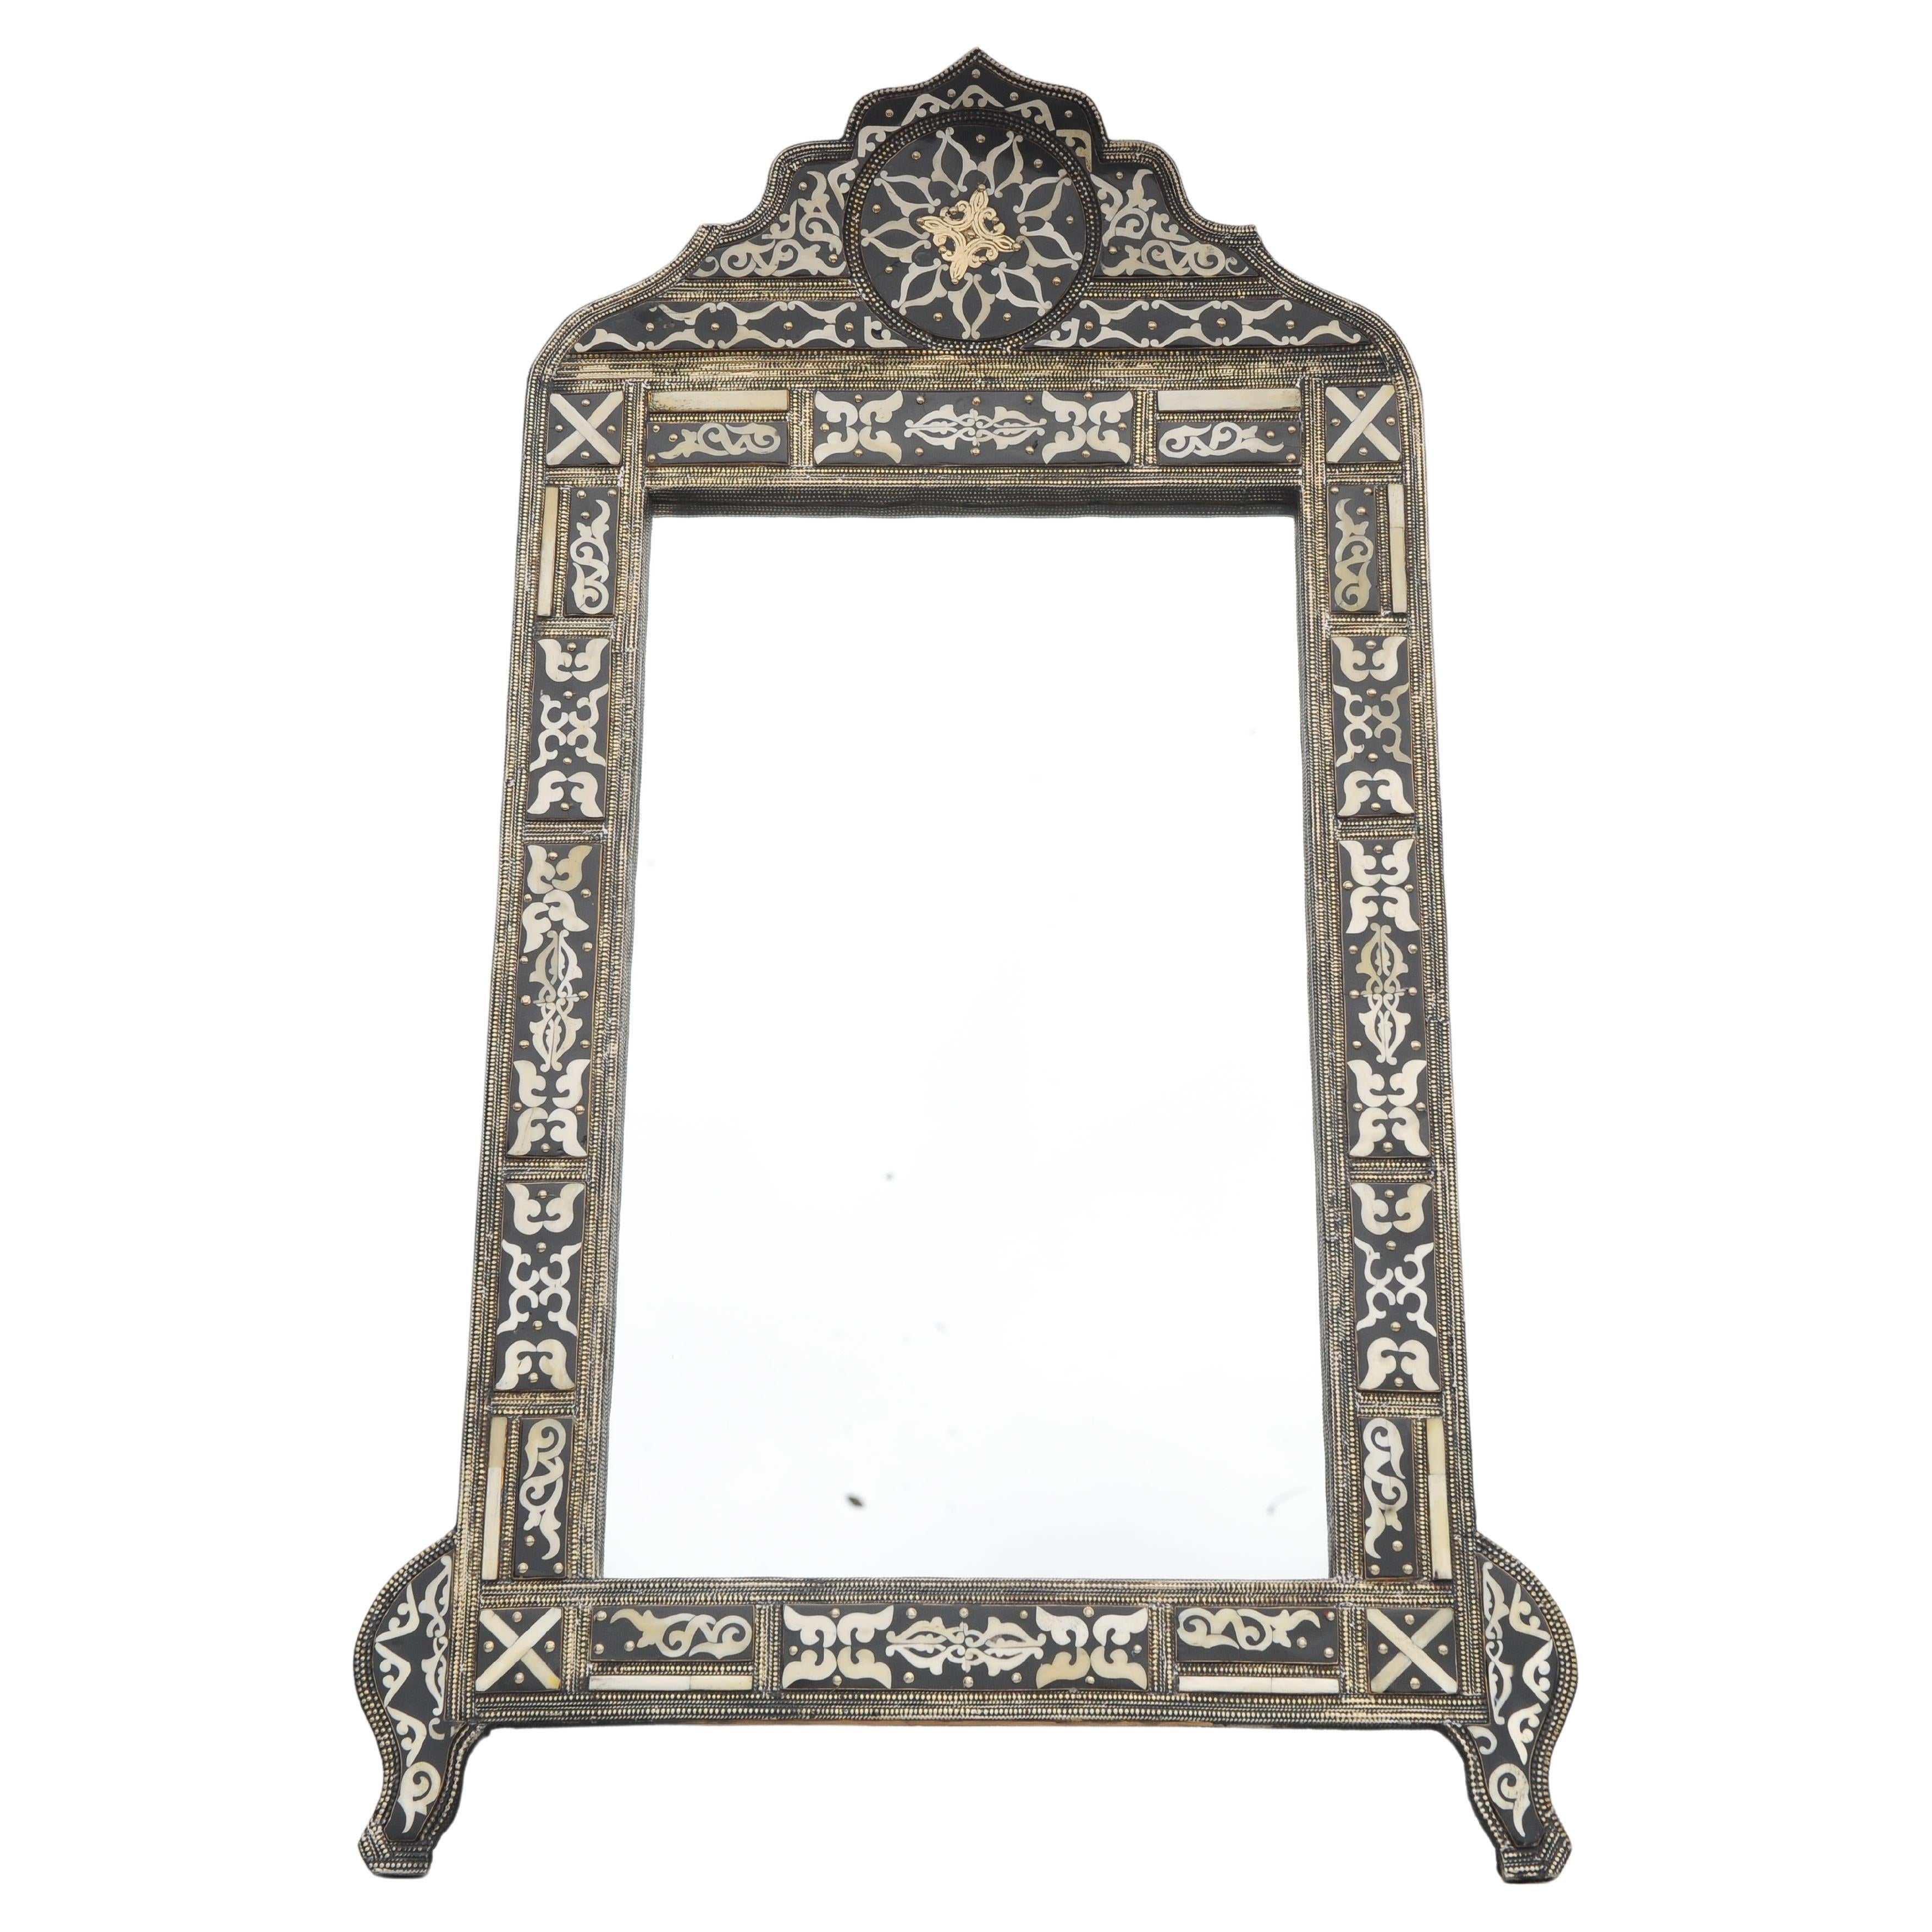 A Beautiful Early 19th Century Highly Decorative Damascene Syrian Wall Mirror.
Hand Crafted With Bone Inlaid & Silvered Metal Decoration. 

Would Suit A Modern or Period Home, The Monochrome Colours Are Very Striking, and Timeless. 

